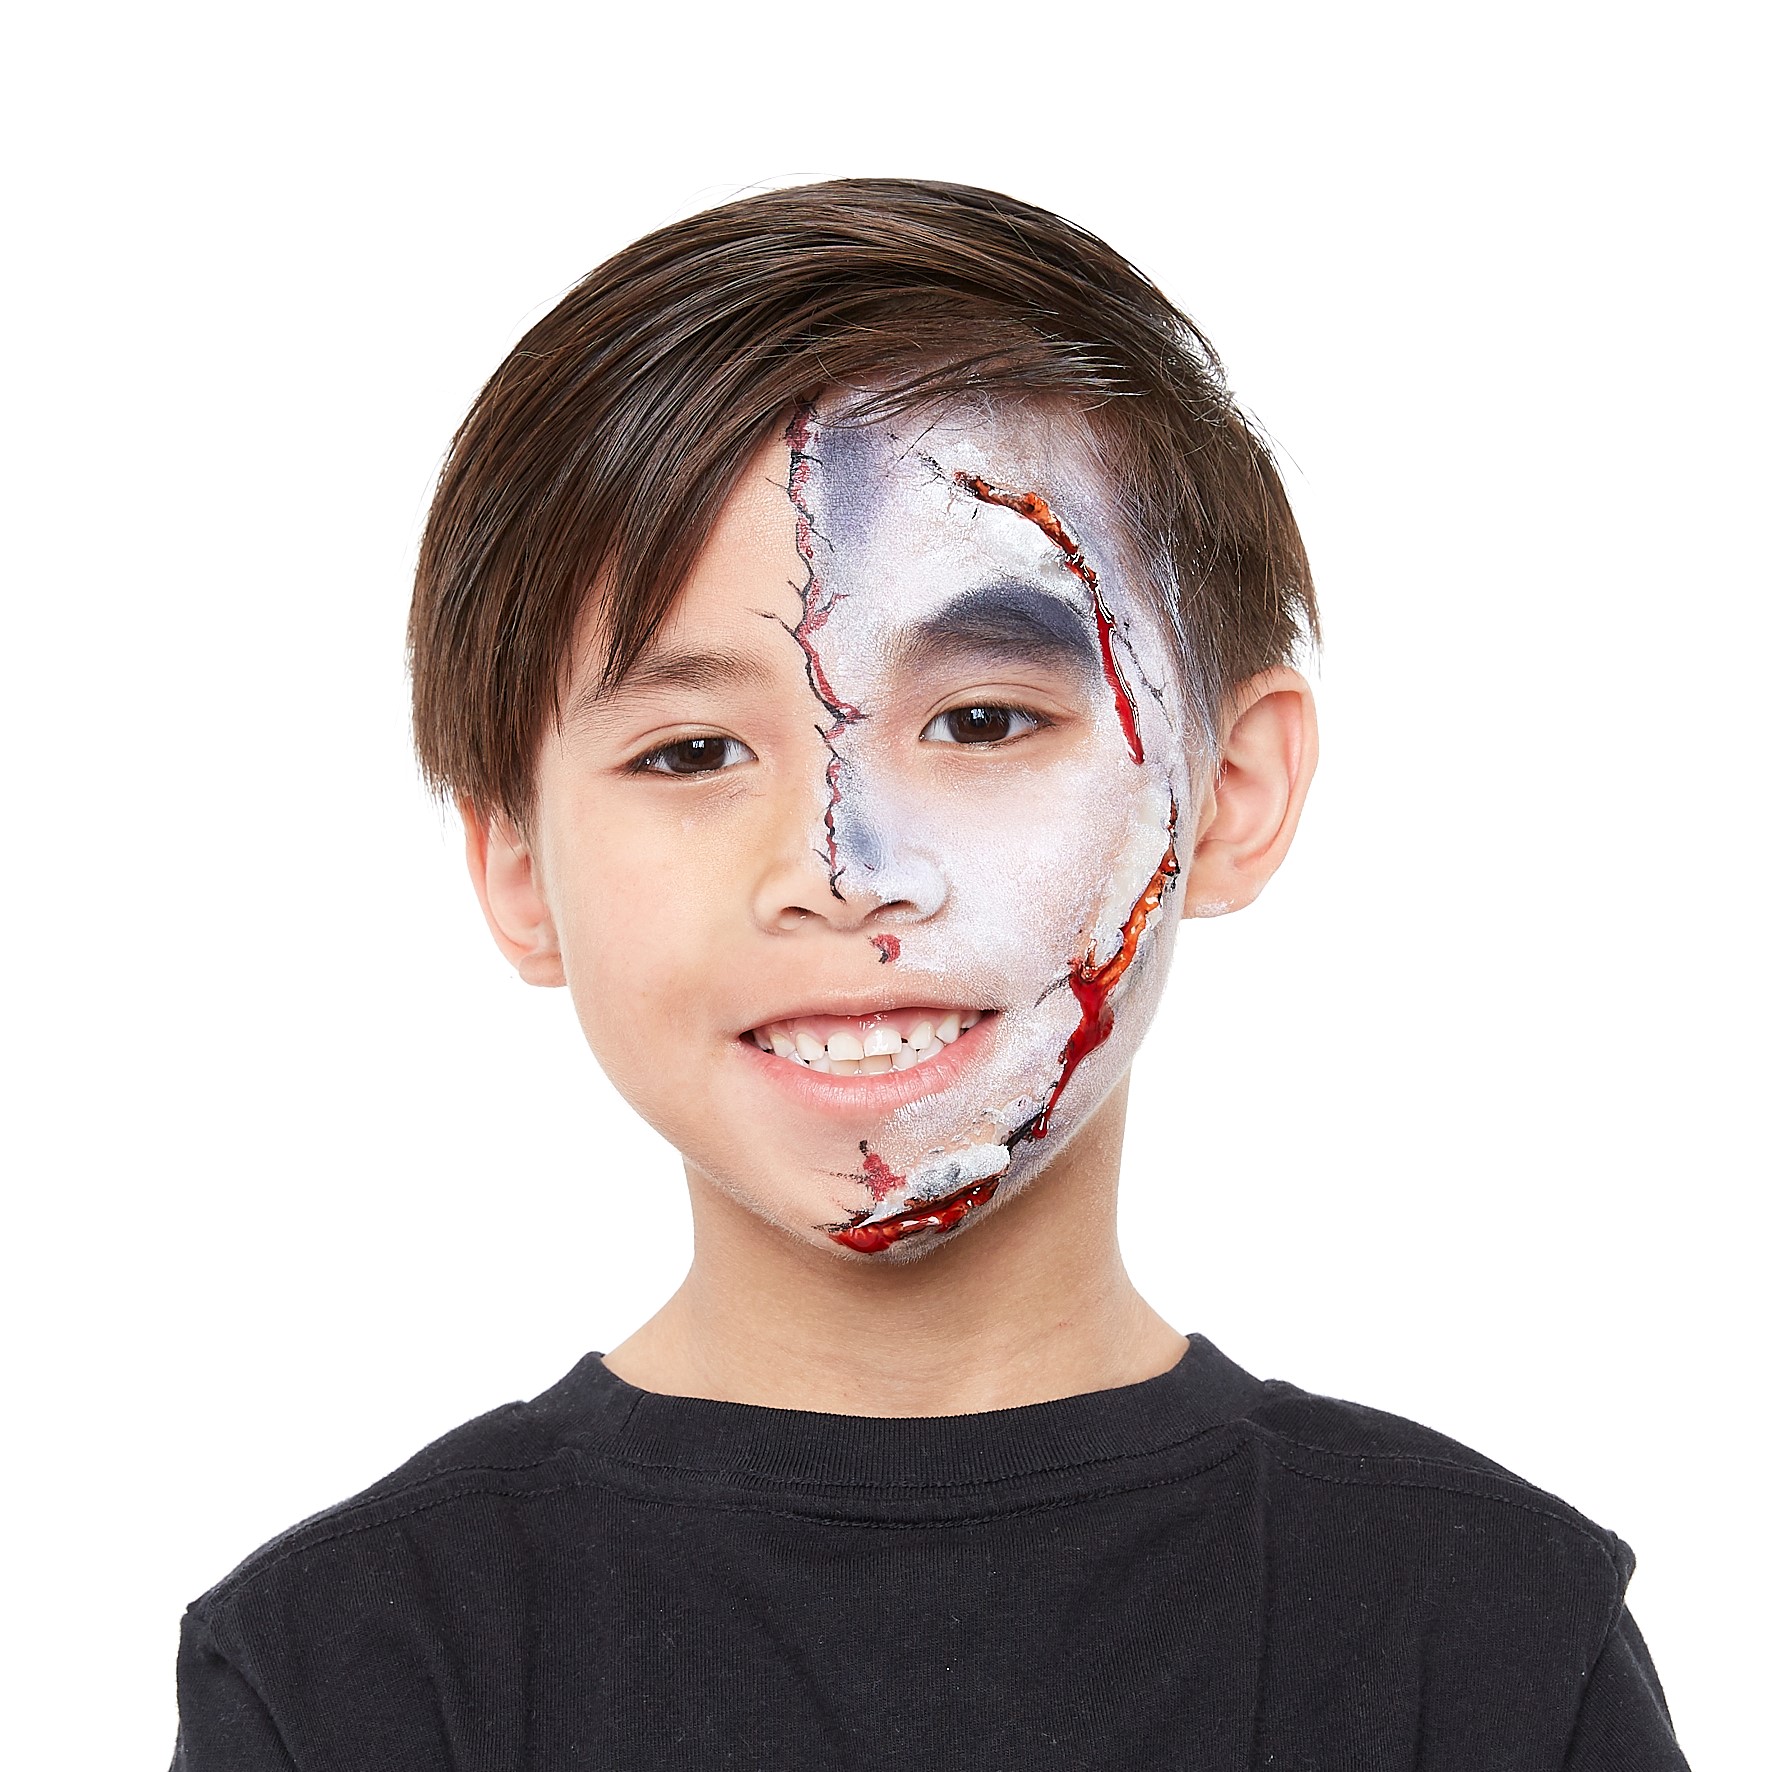 Face Painting Tutorial, Horror Face Painting